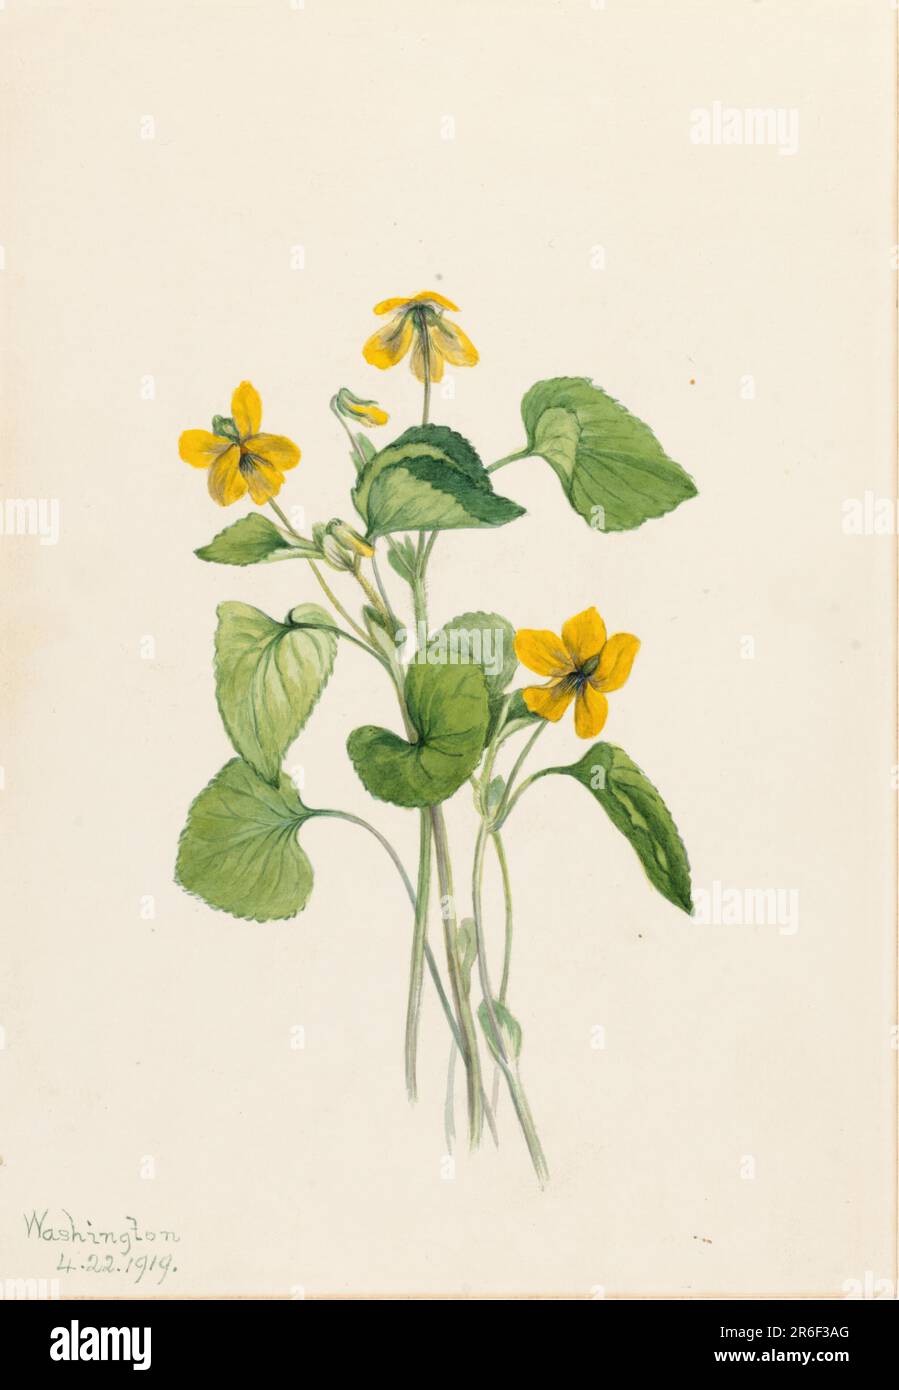 Smooth Yellow Violet (Viola eriocarpa). Date: 1919. Watercolor on paper. Museum: Smithsonian American Art Museum. Stock Photo